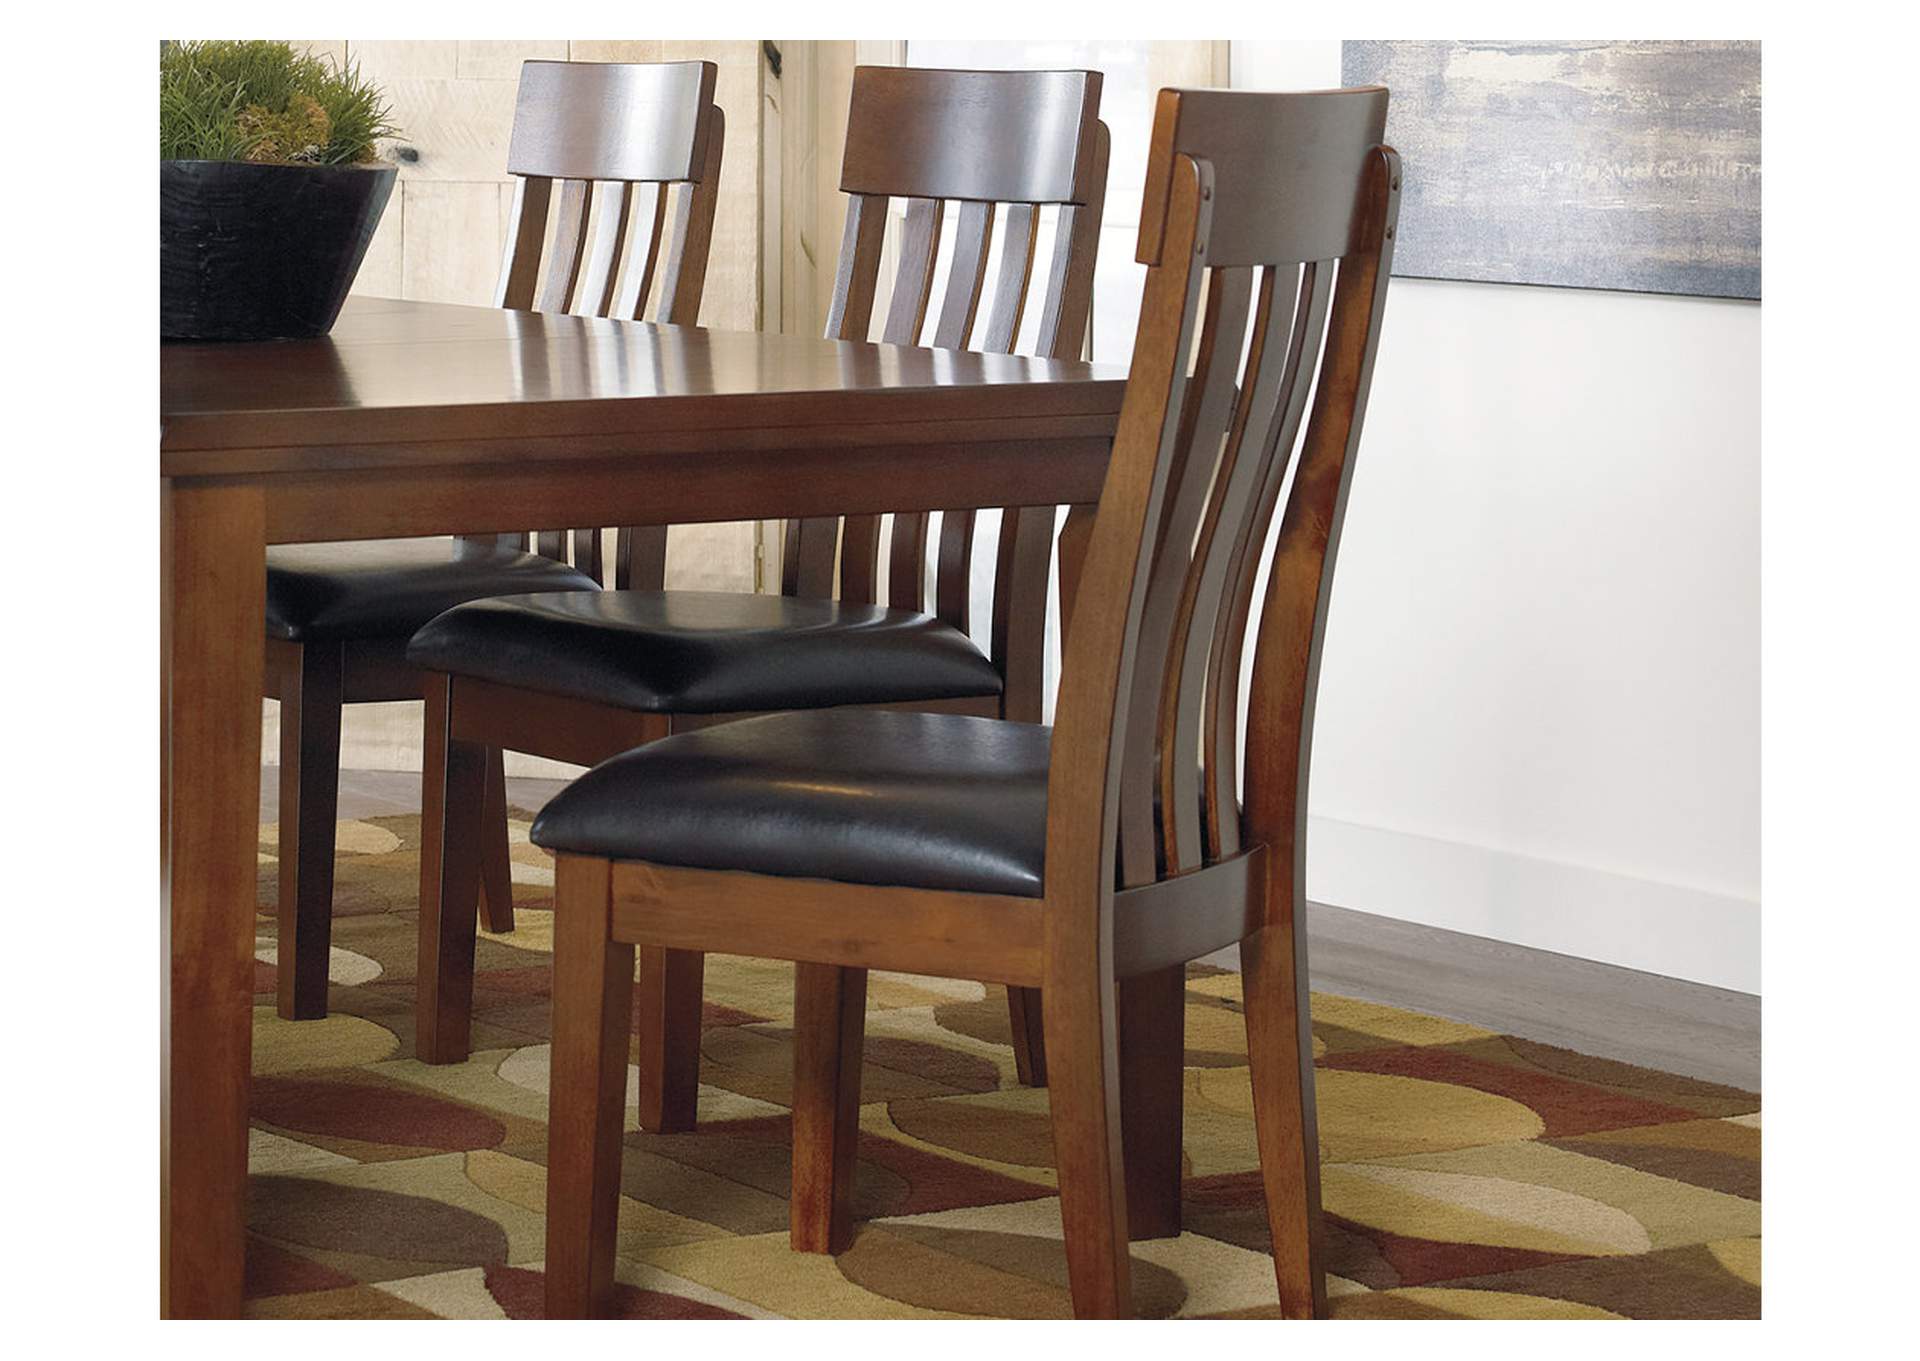 Ralene Dining Chair (Set of 2),Signature Design By Ashley